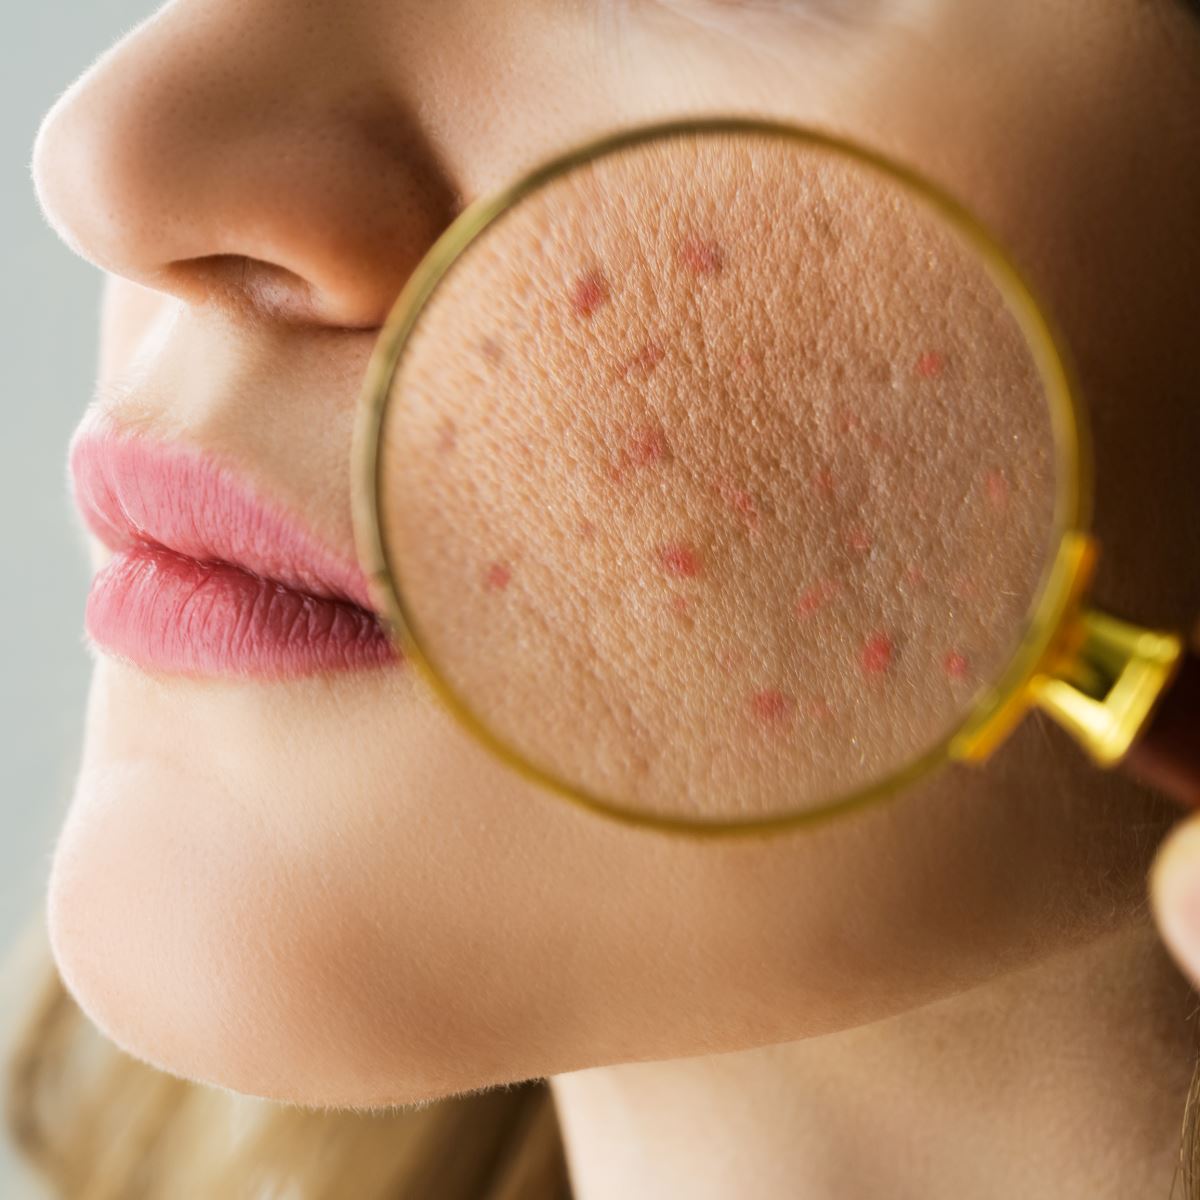 07. What Actually Causes Acne?